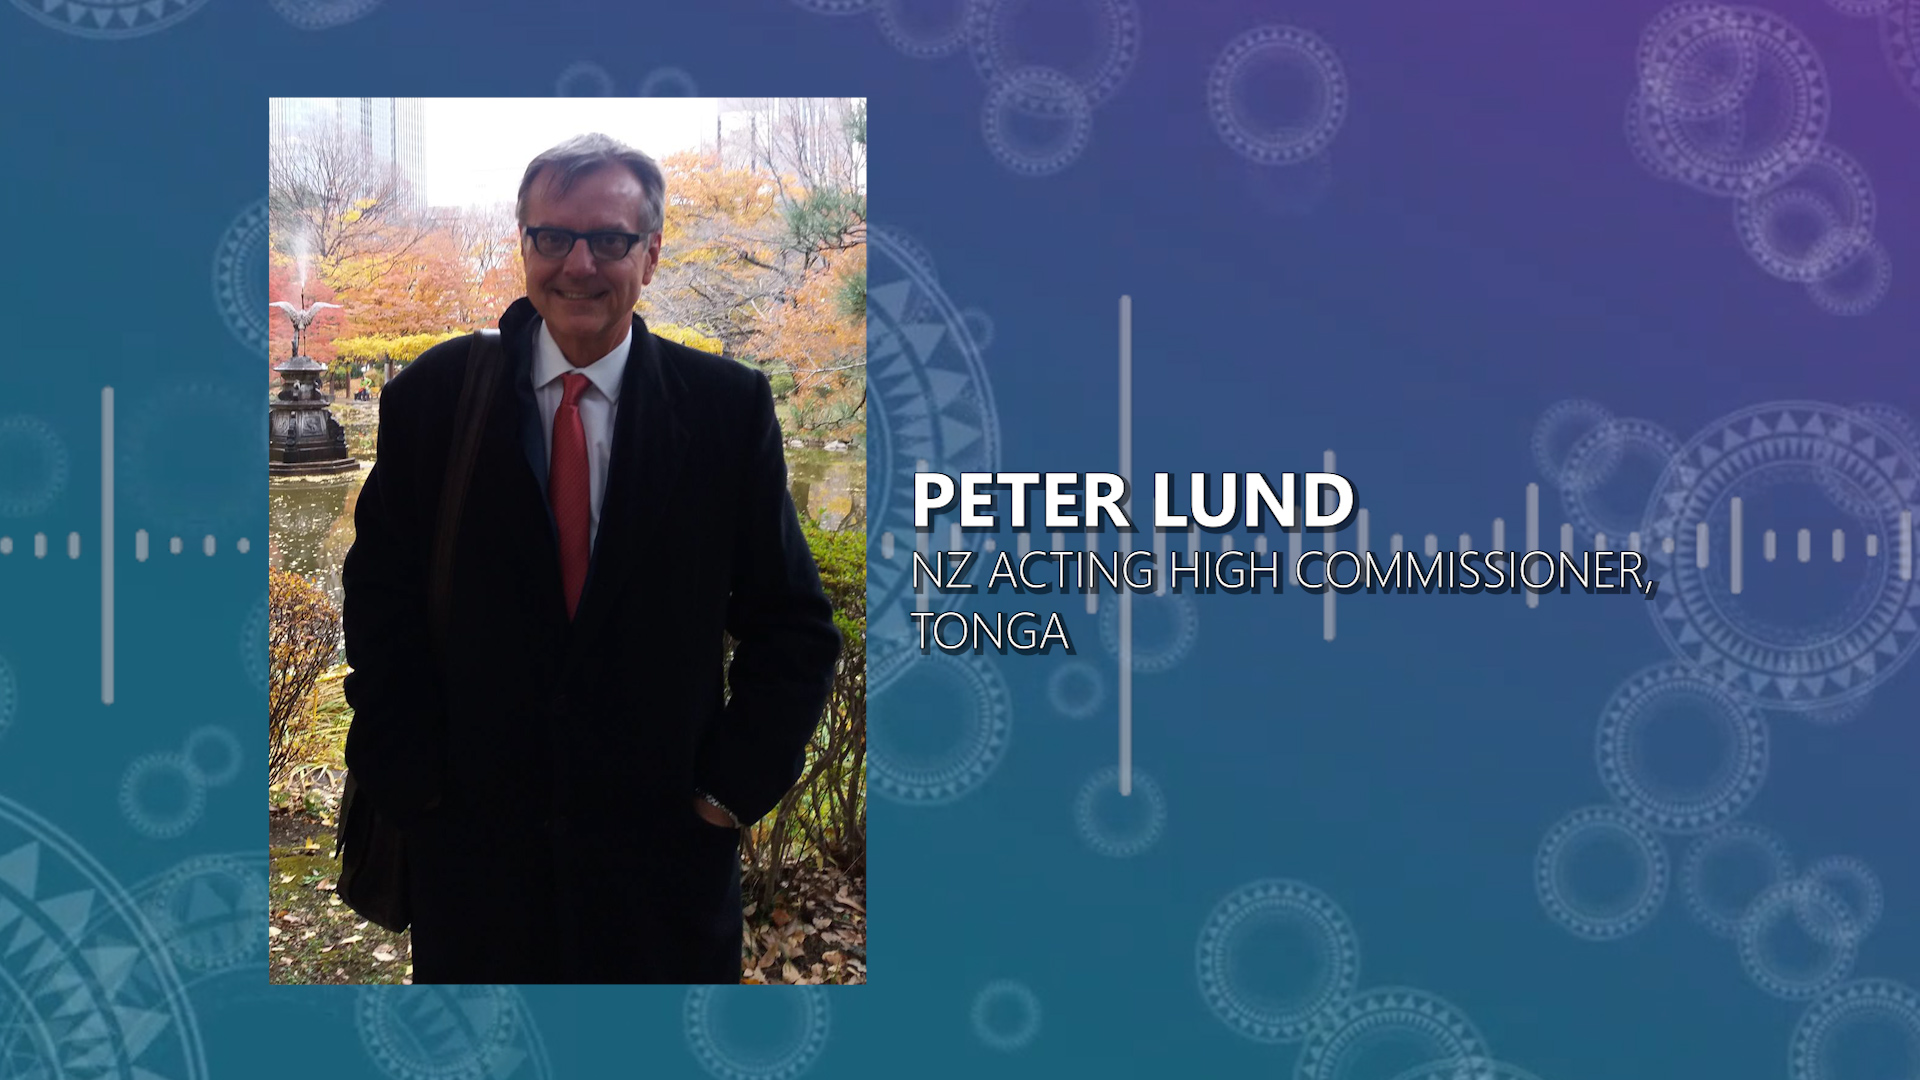 NZ's Acting High Commissioner for Tonga, Peter Lund spoke with John Pulu via satellite phone from Nuku'alofa earlier today.